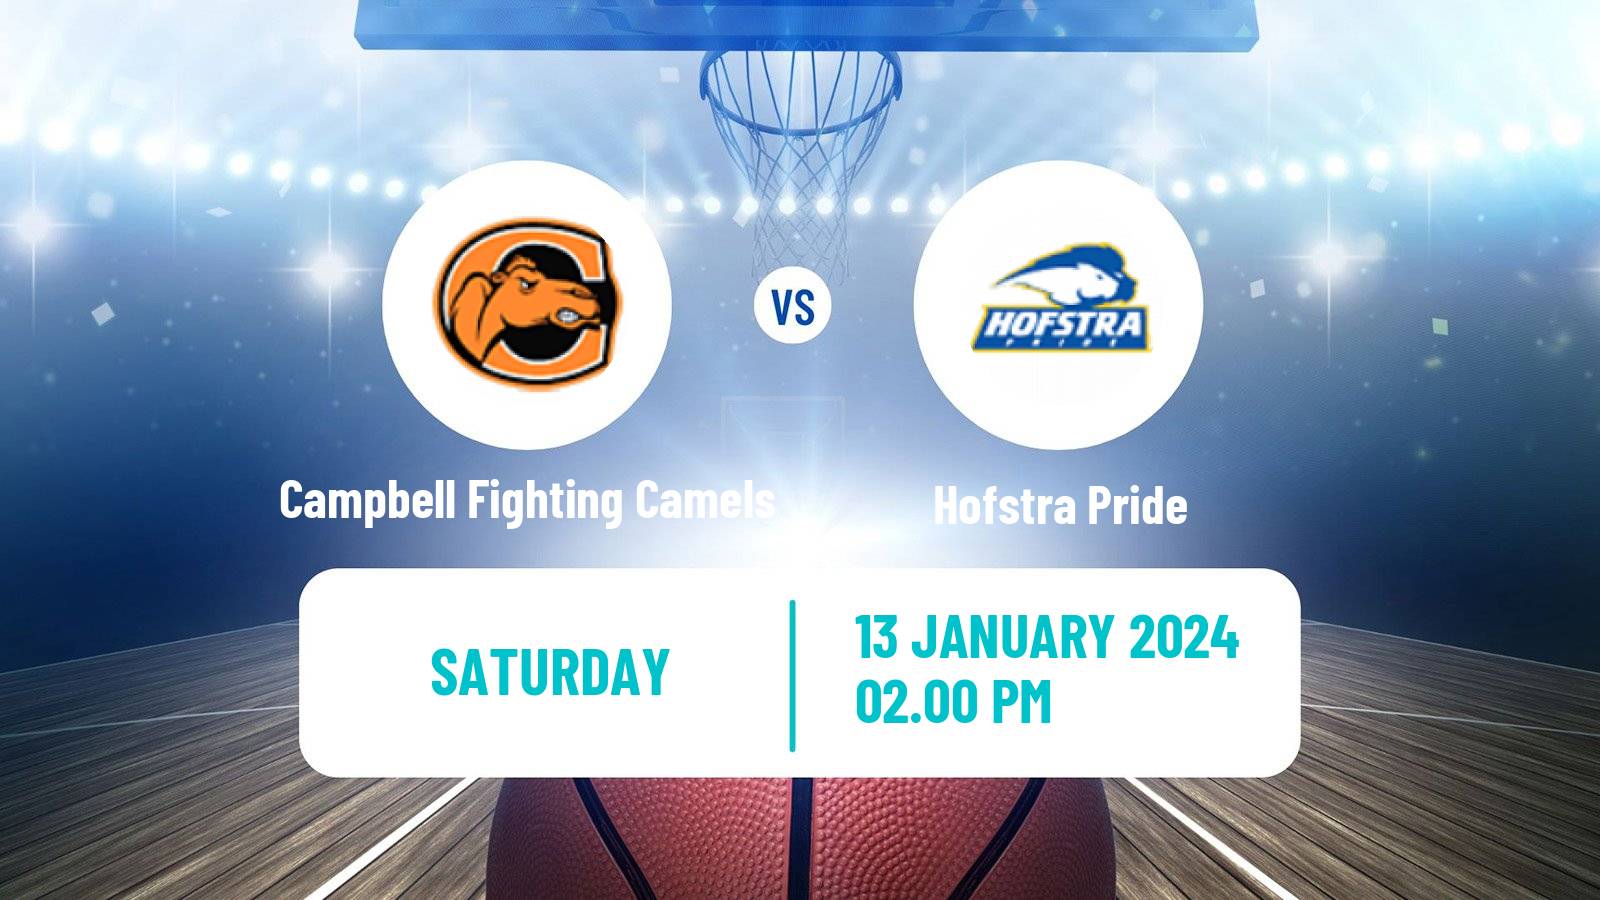 Basketball NCAA College Basketball Campbell Fighting Camels - Hofstra Pride